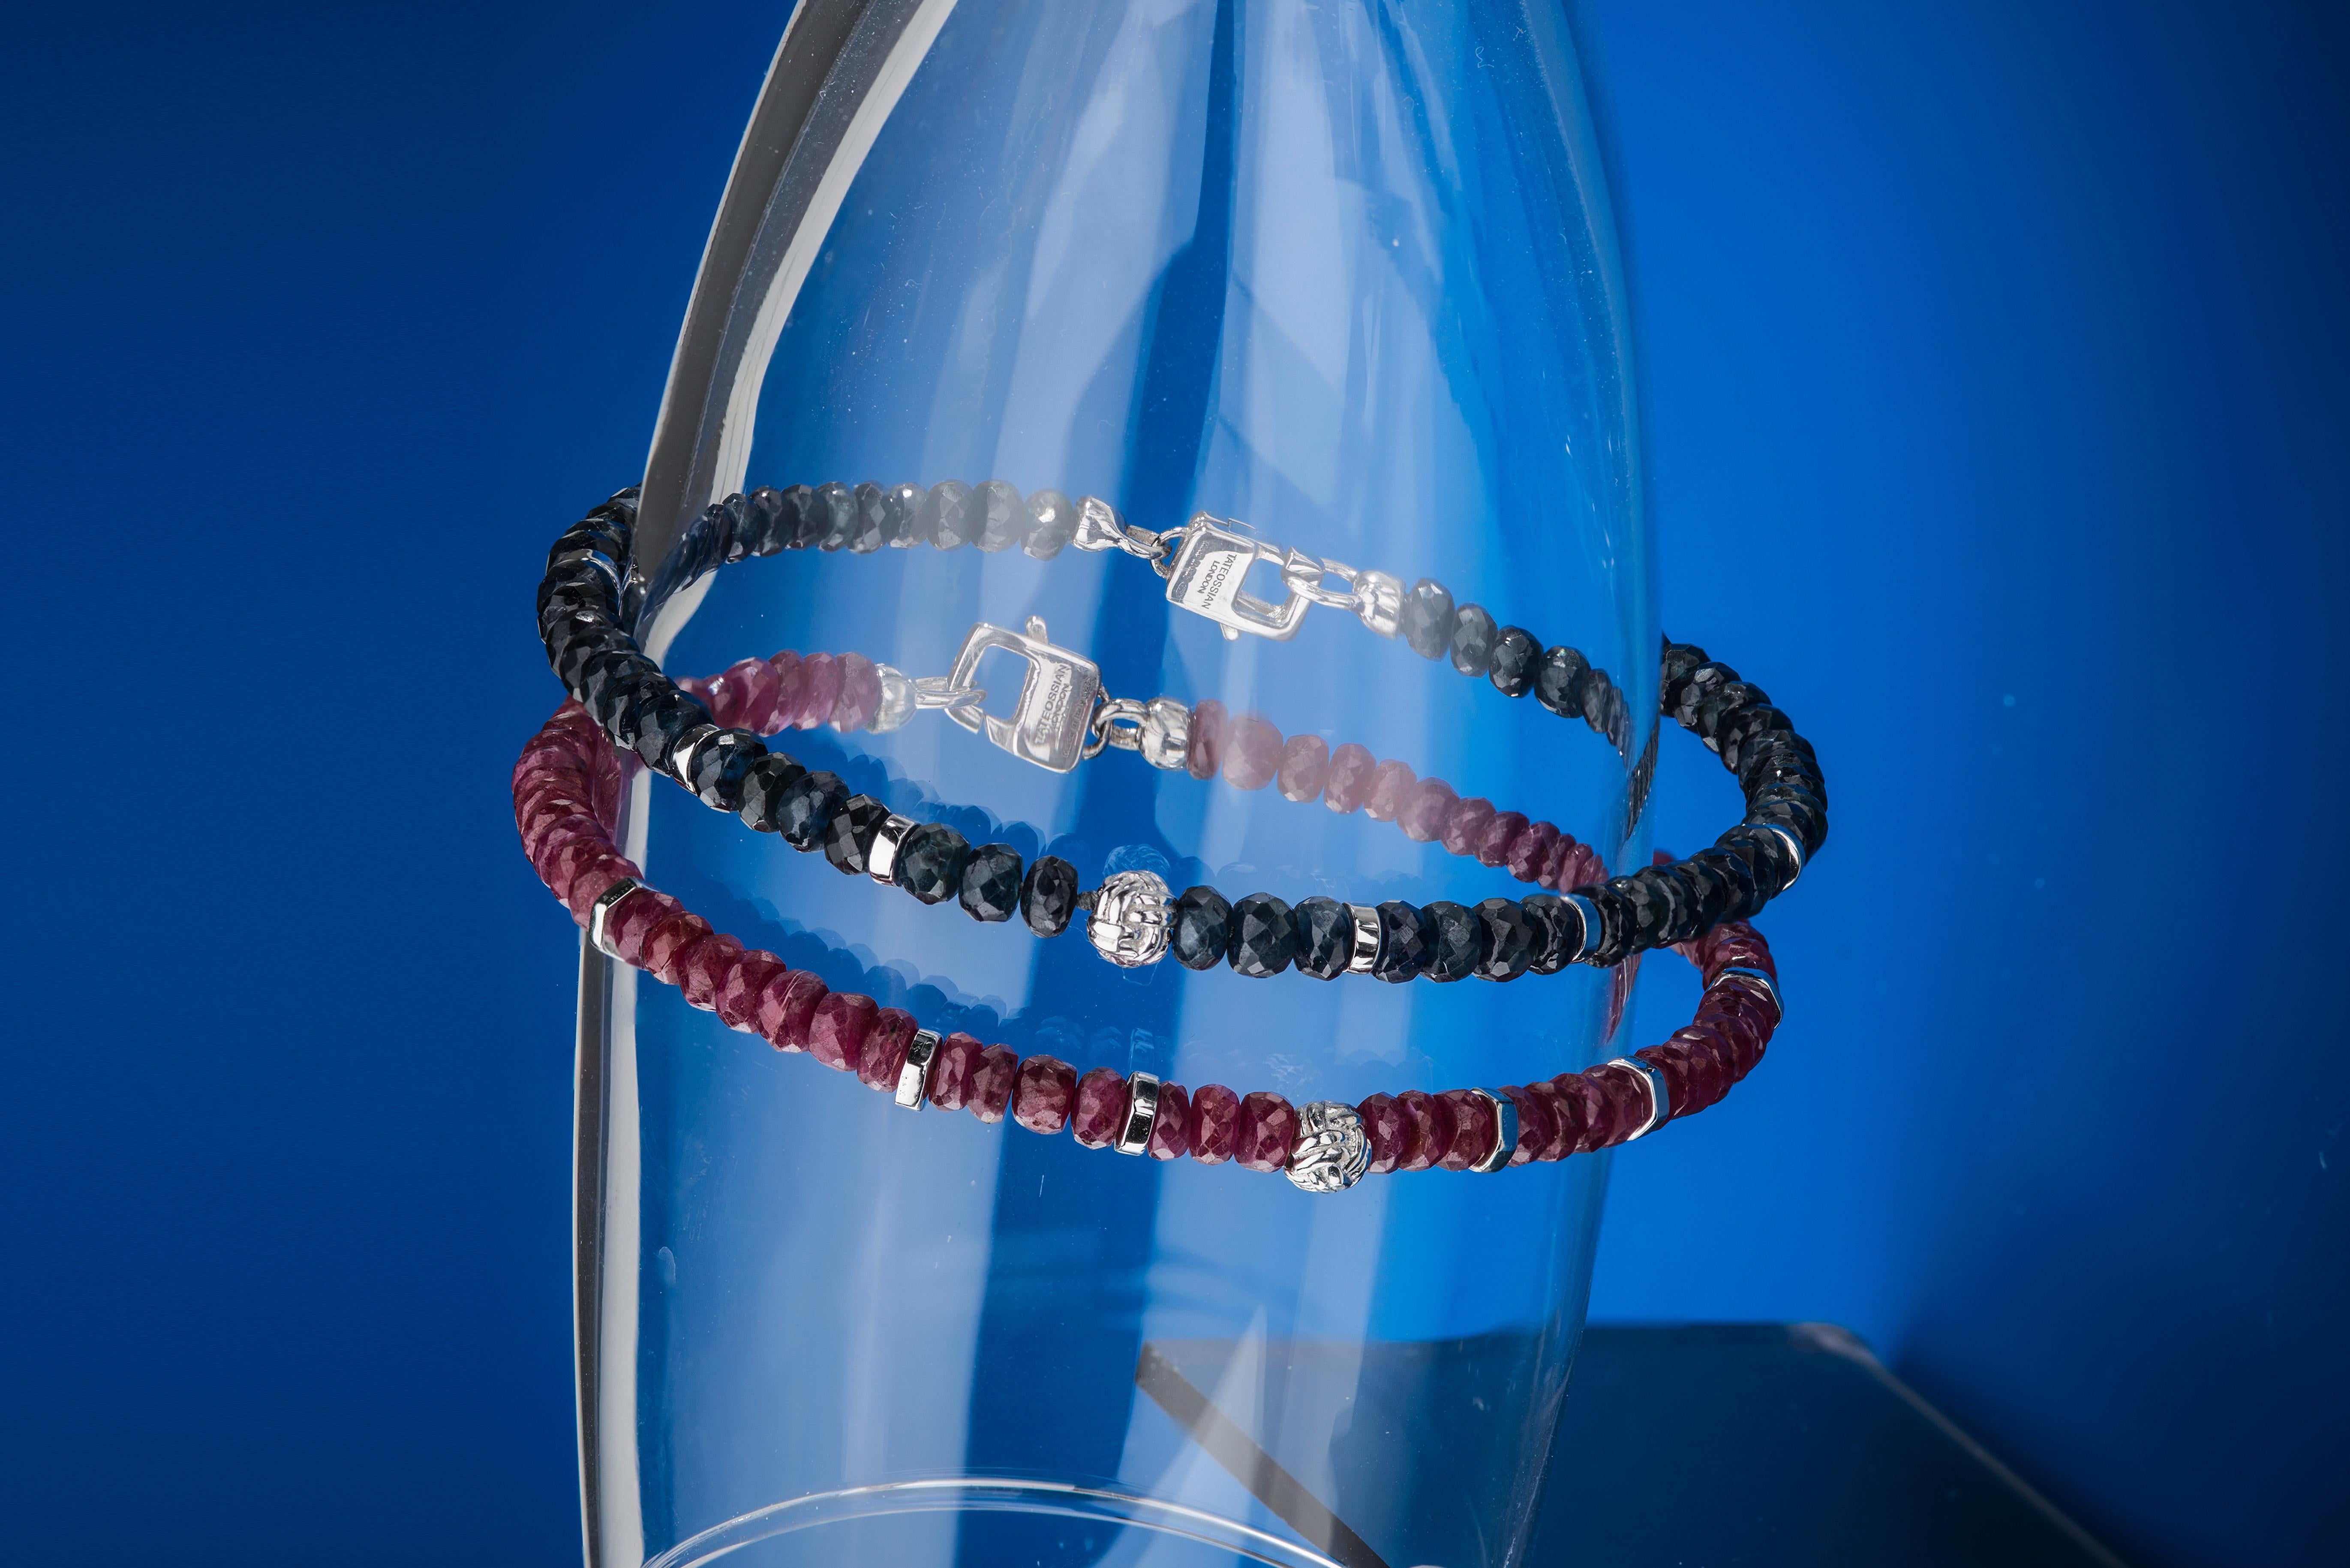 Tateossian continues to explore and find beauty in rare and less traditional precious stones. This hand strung beaded bracelet are made up of  precious Sapphires faceted rondels, silver discs, a central silver knot bead and our signature Tateossian